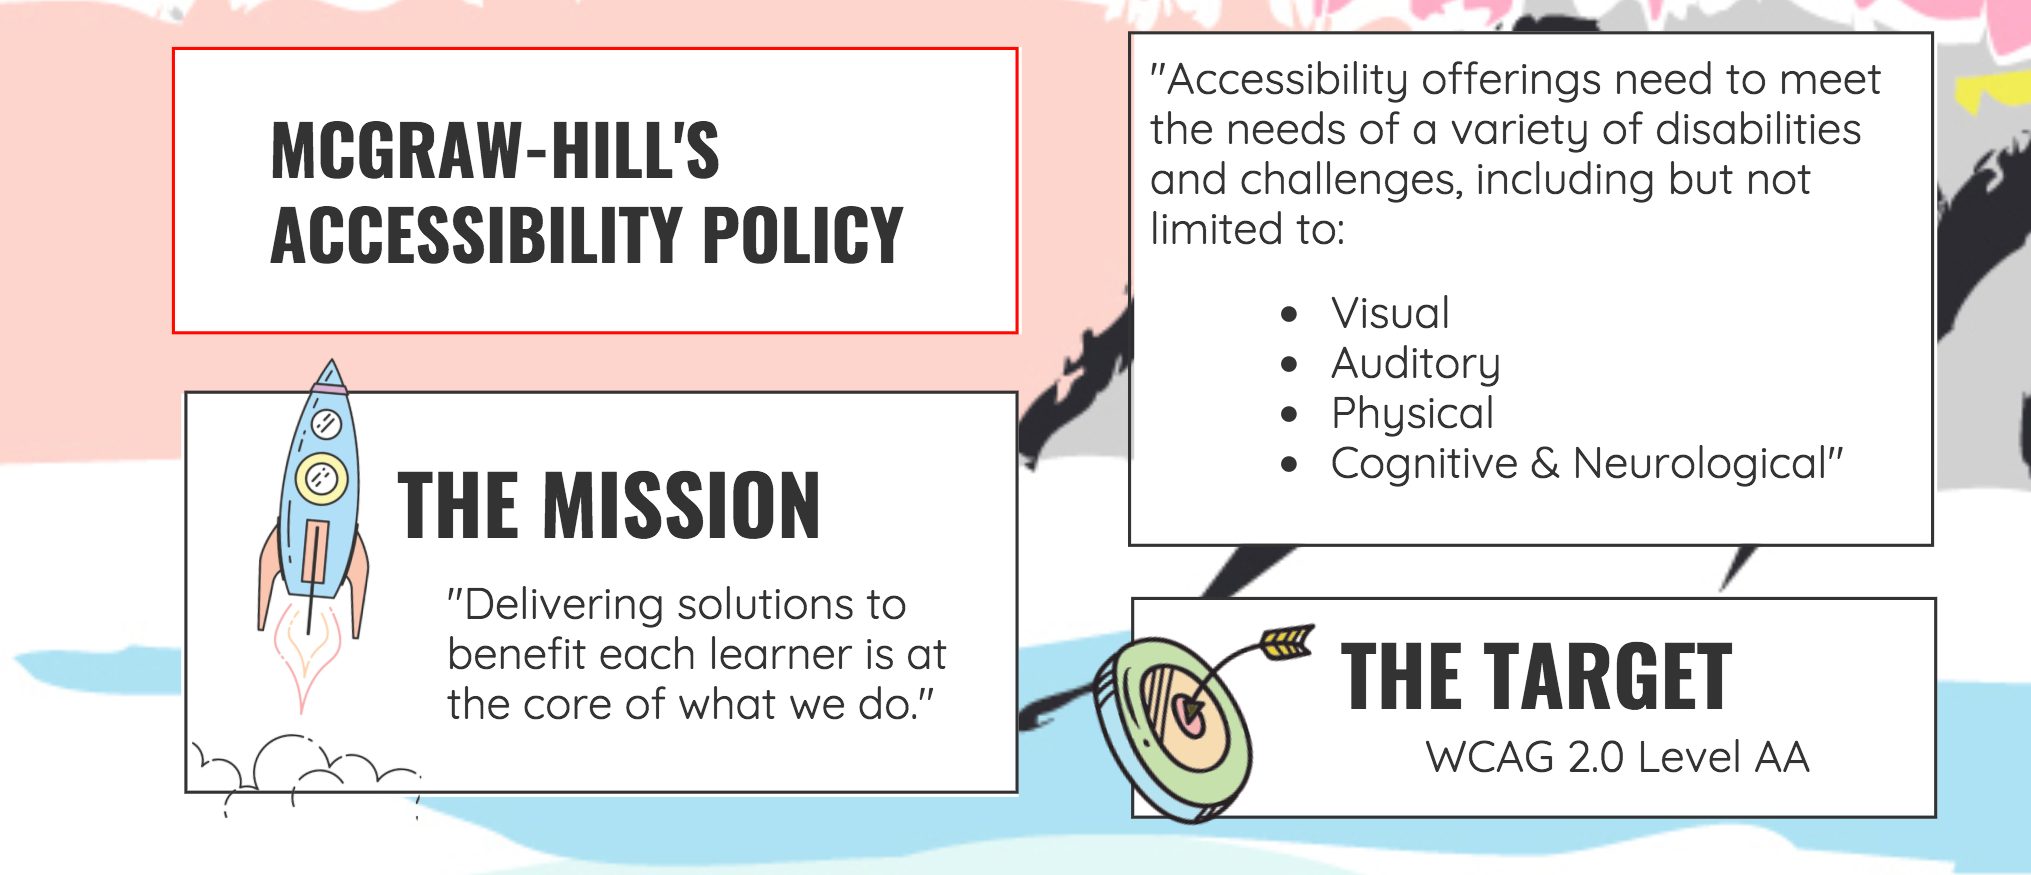 MCGRAW-HILL'S ACCESSIBILITY POLICY the mission is Deliver solutions to benefit each learner is at the core of what we do. Accessibility offerings need to meet the needs of a variety of disabilities and challenges, including but not limited to: Visual Auditory Physical Cognitive & Neurological. The target is WCAG 2.0 level AA